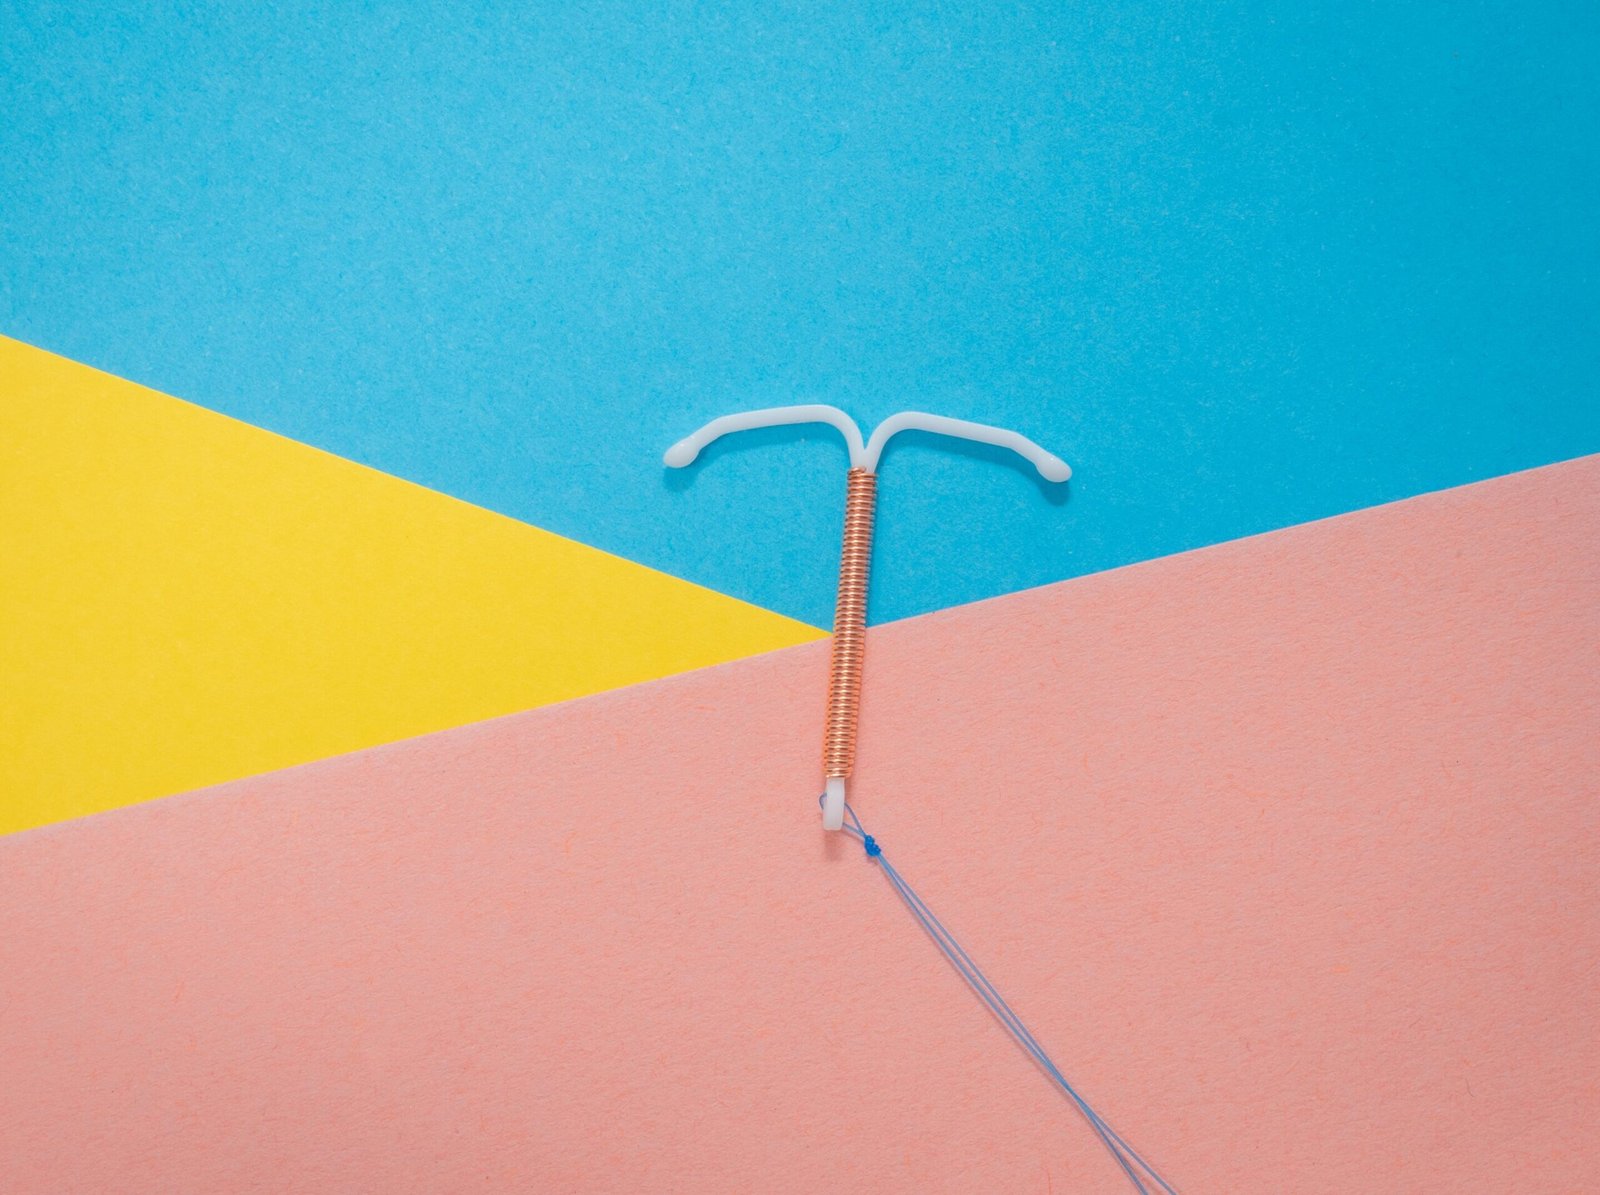 Decision to offer sedation for often painful IUD insertion is groundbreaking health experts say